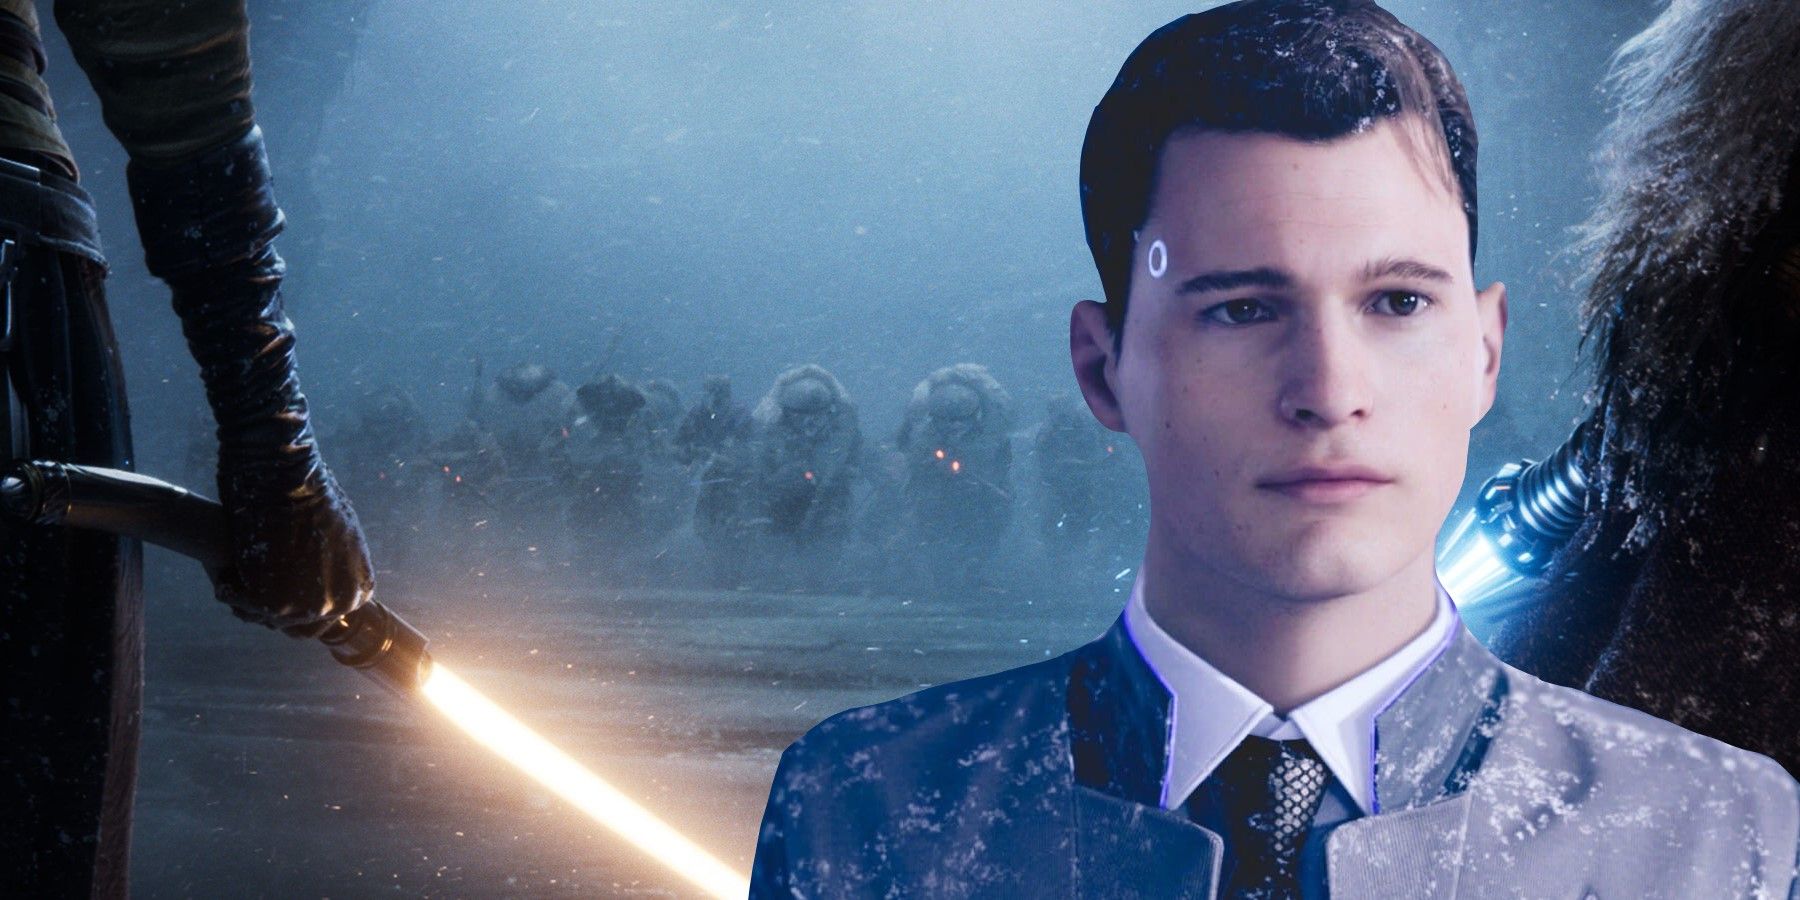 star Wars Eclipse screenshot with two Jedi standing in front of an army, with an image of Connor from Detroit: Become Human superimposed in front of it